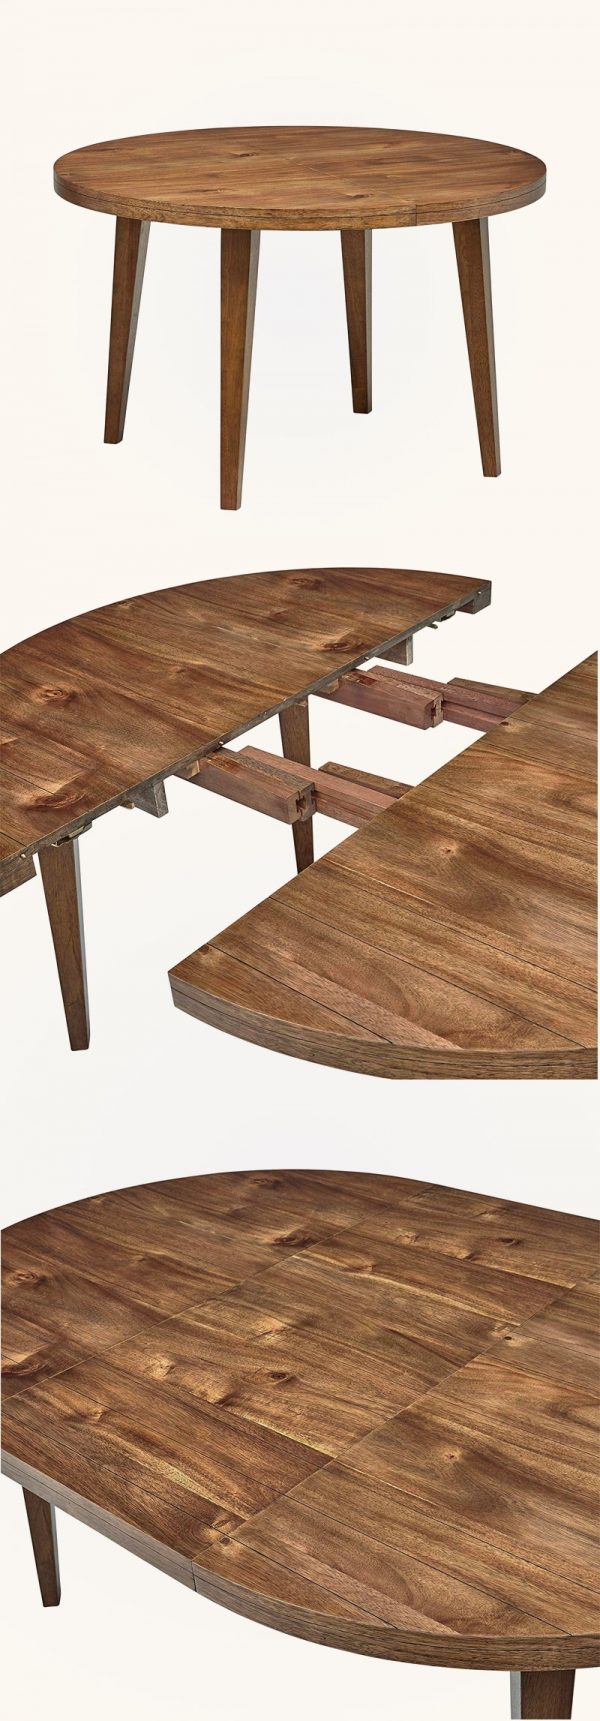 41 Extendable Dining Tables To Maximize, How To Make A Round Dining Table Bigger